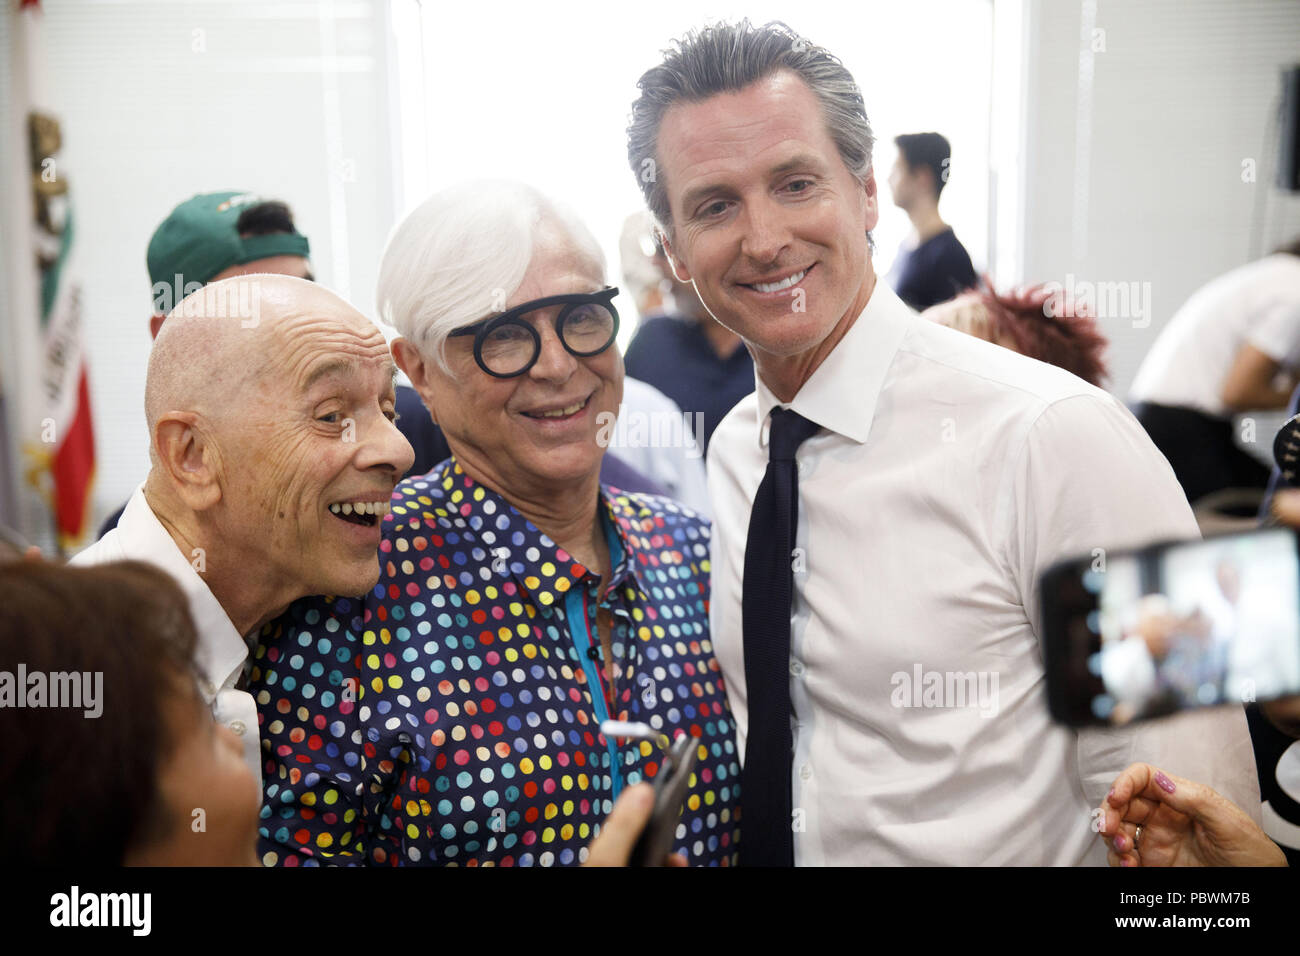 Palm Springs, California, USA. 31st May, 2018. Gavin Newsom, Democractic candidate for governor of California, stands for a photograph with Dennis De Groot, center, as he campaigns during an event sponsored by Equality California at the Mizell Senior Center on Thursday, May 31, 2018 in Palm Springs, Calif. © 2018 Patrick T. Fallon Credit: Patrick Fallon/ZUMA Wire/Alamy Live News Stock Photo